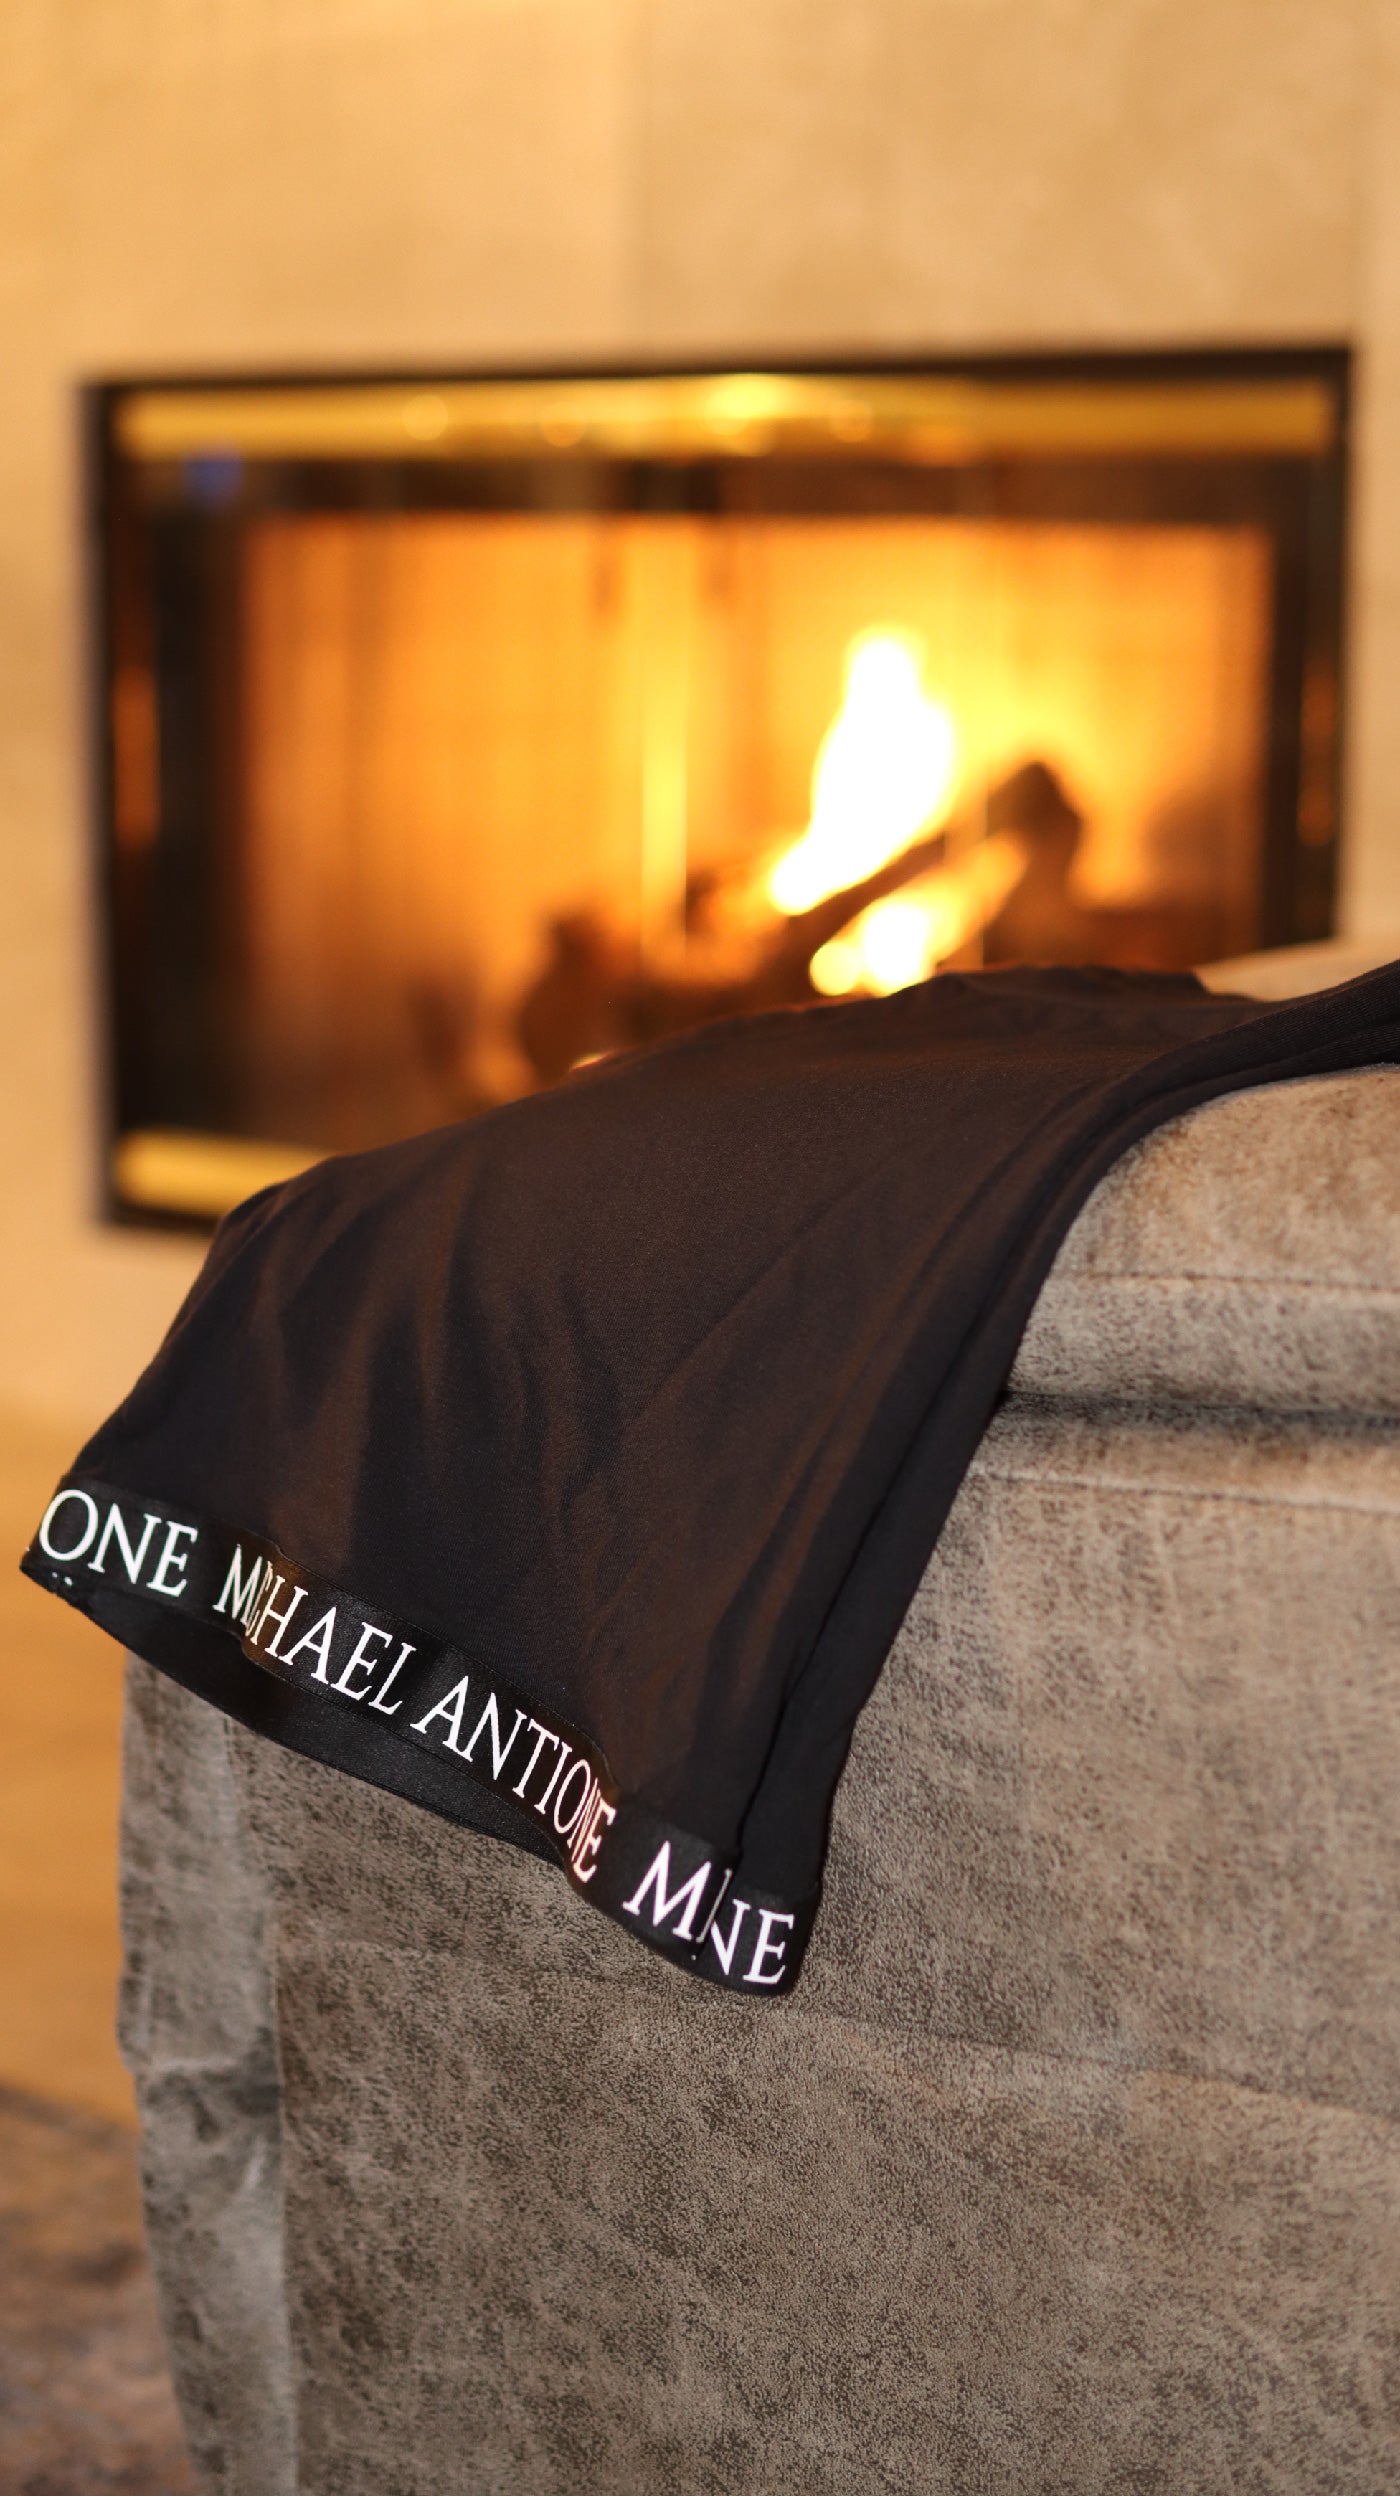 Black boxer briefs draped over the corner of a couch in front of a fireplace